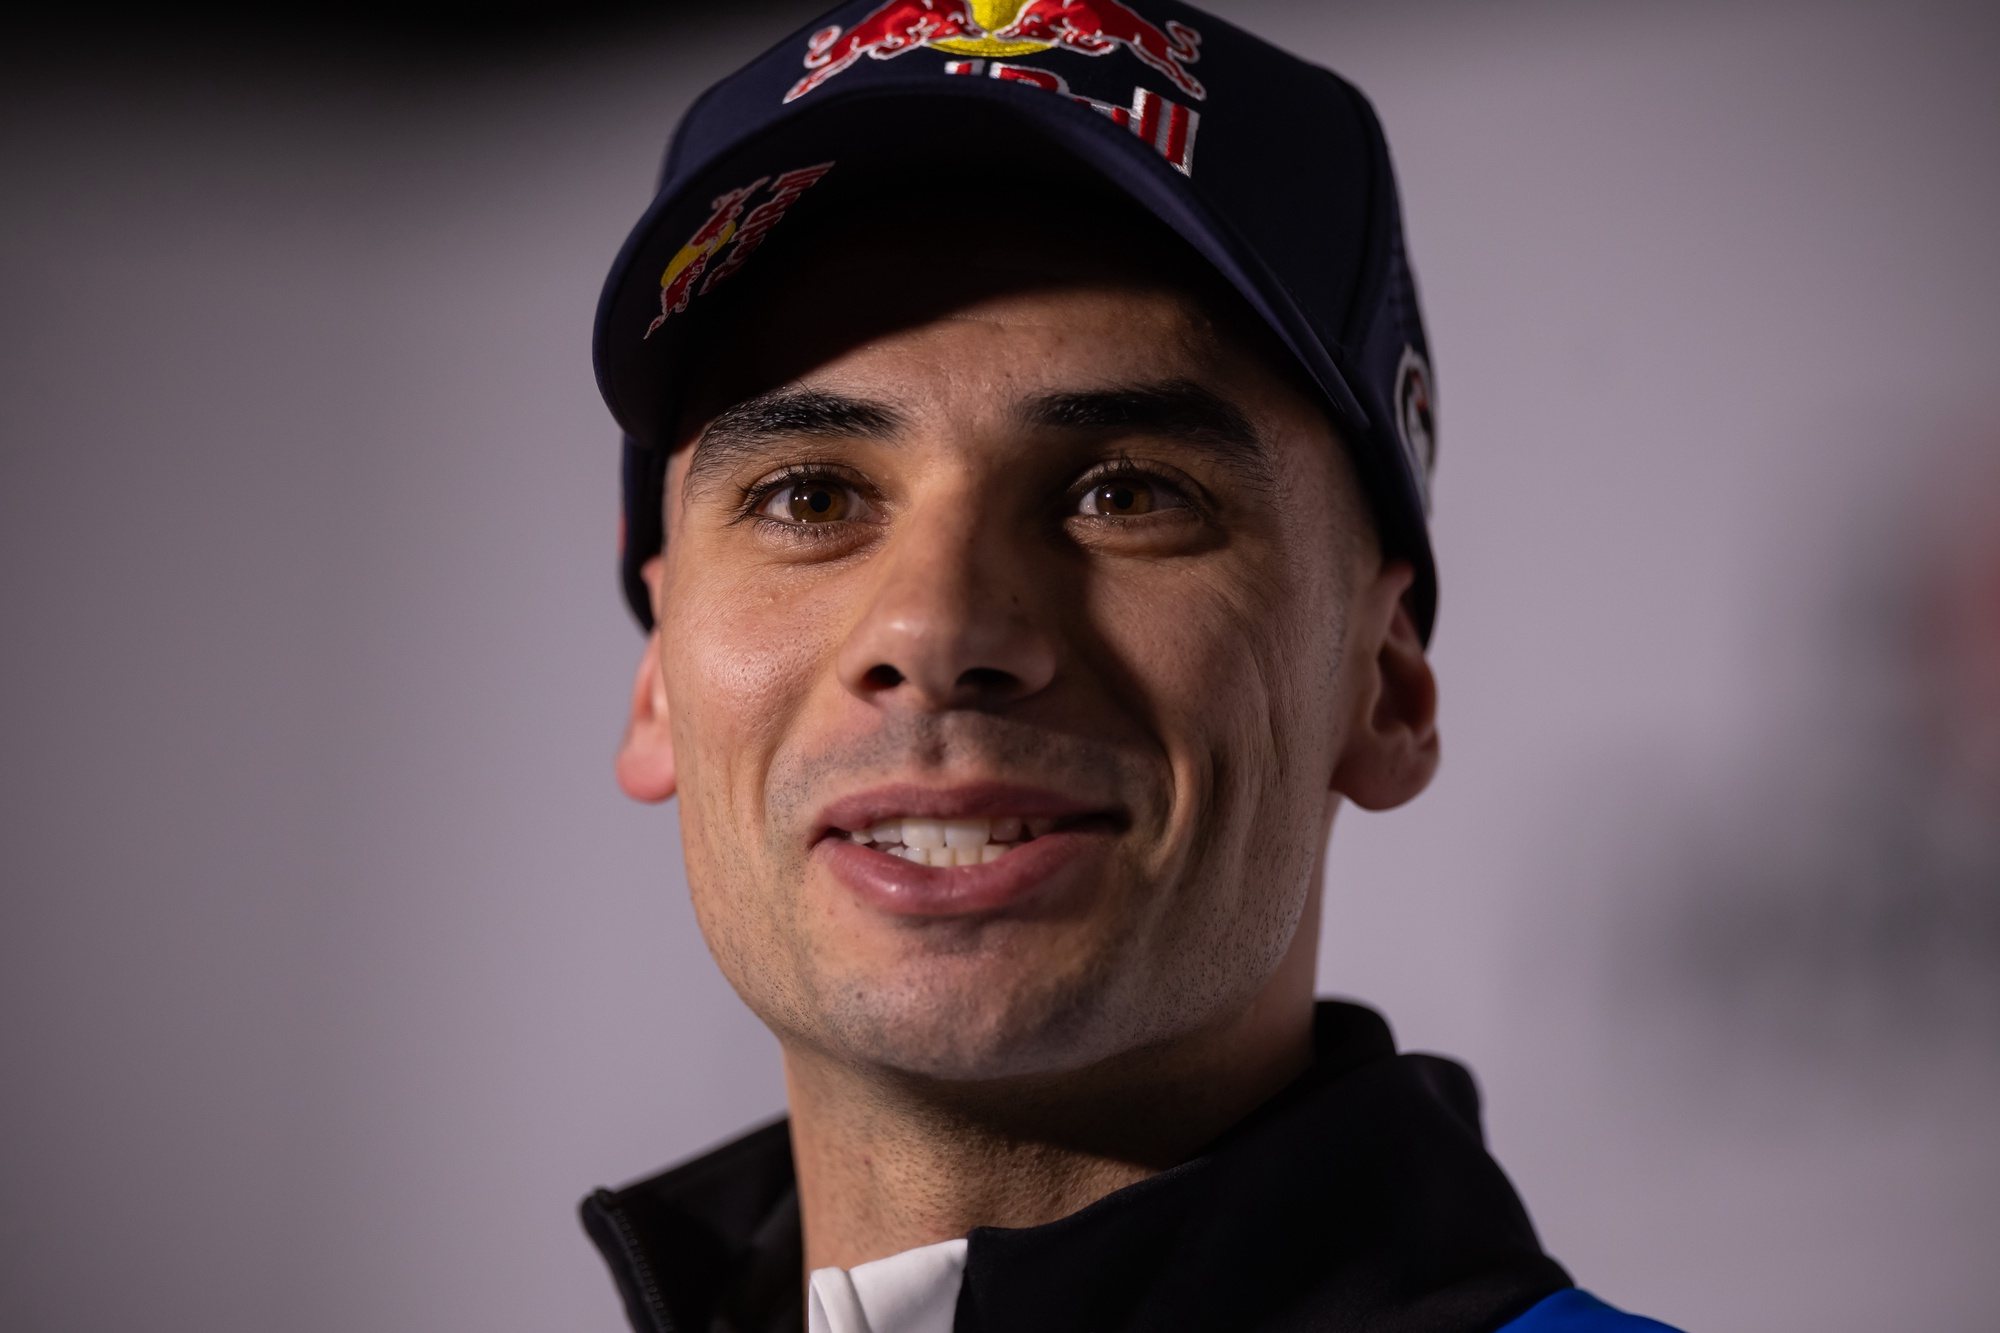 Moto GP portuguese rider Miguel Oliveira of Trackhouse Racing team attends a press conference ahead of the Moto GP Grand Prix of Portugal that will take place from March 22 to March 24, at Autodromo Internacional do Algarve, Portimao, south of Portugal, 21 March 2024. JOSE SENA GOULAO/LUSA